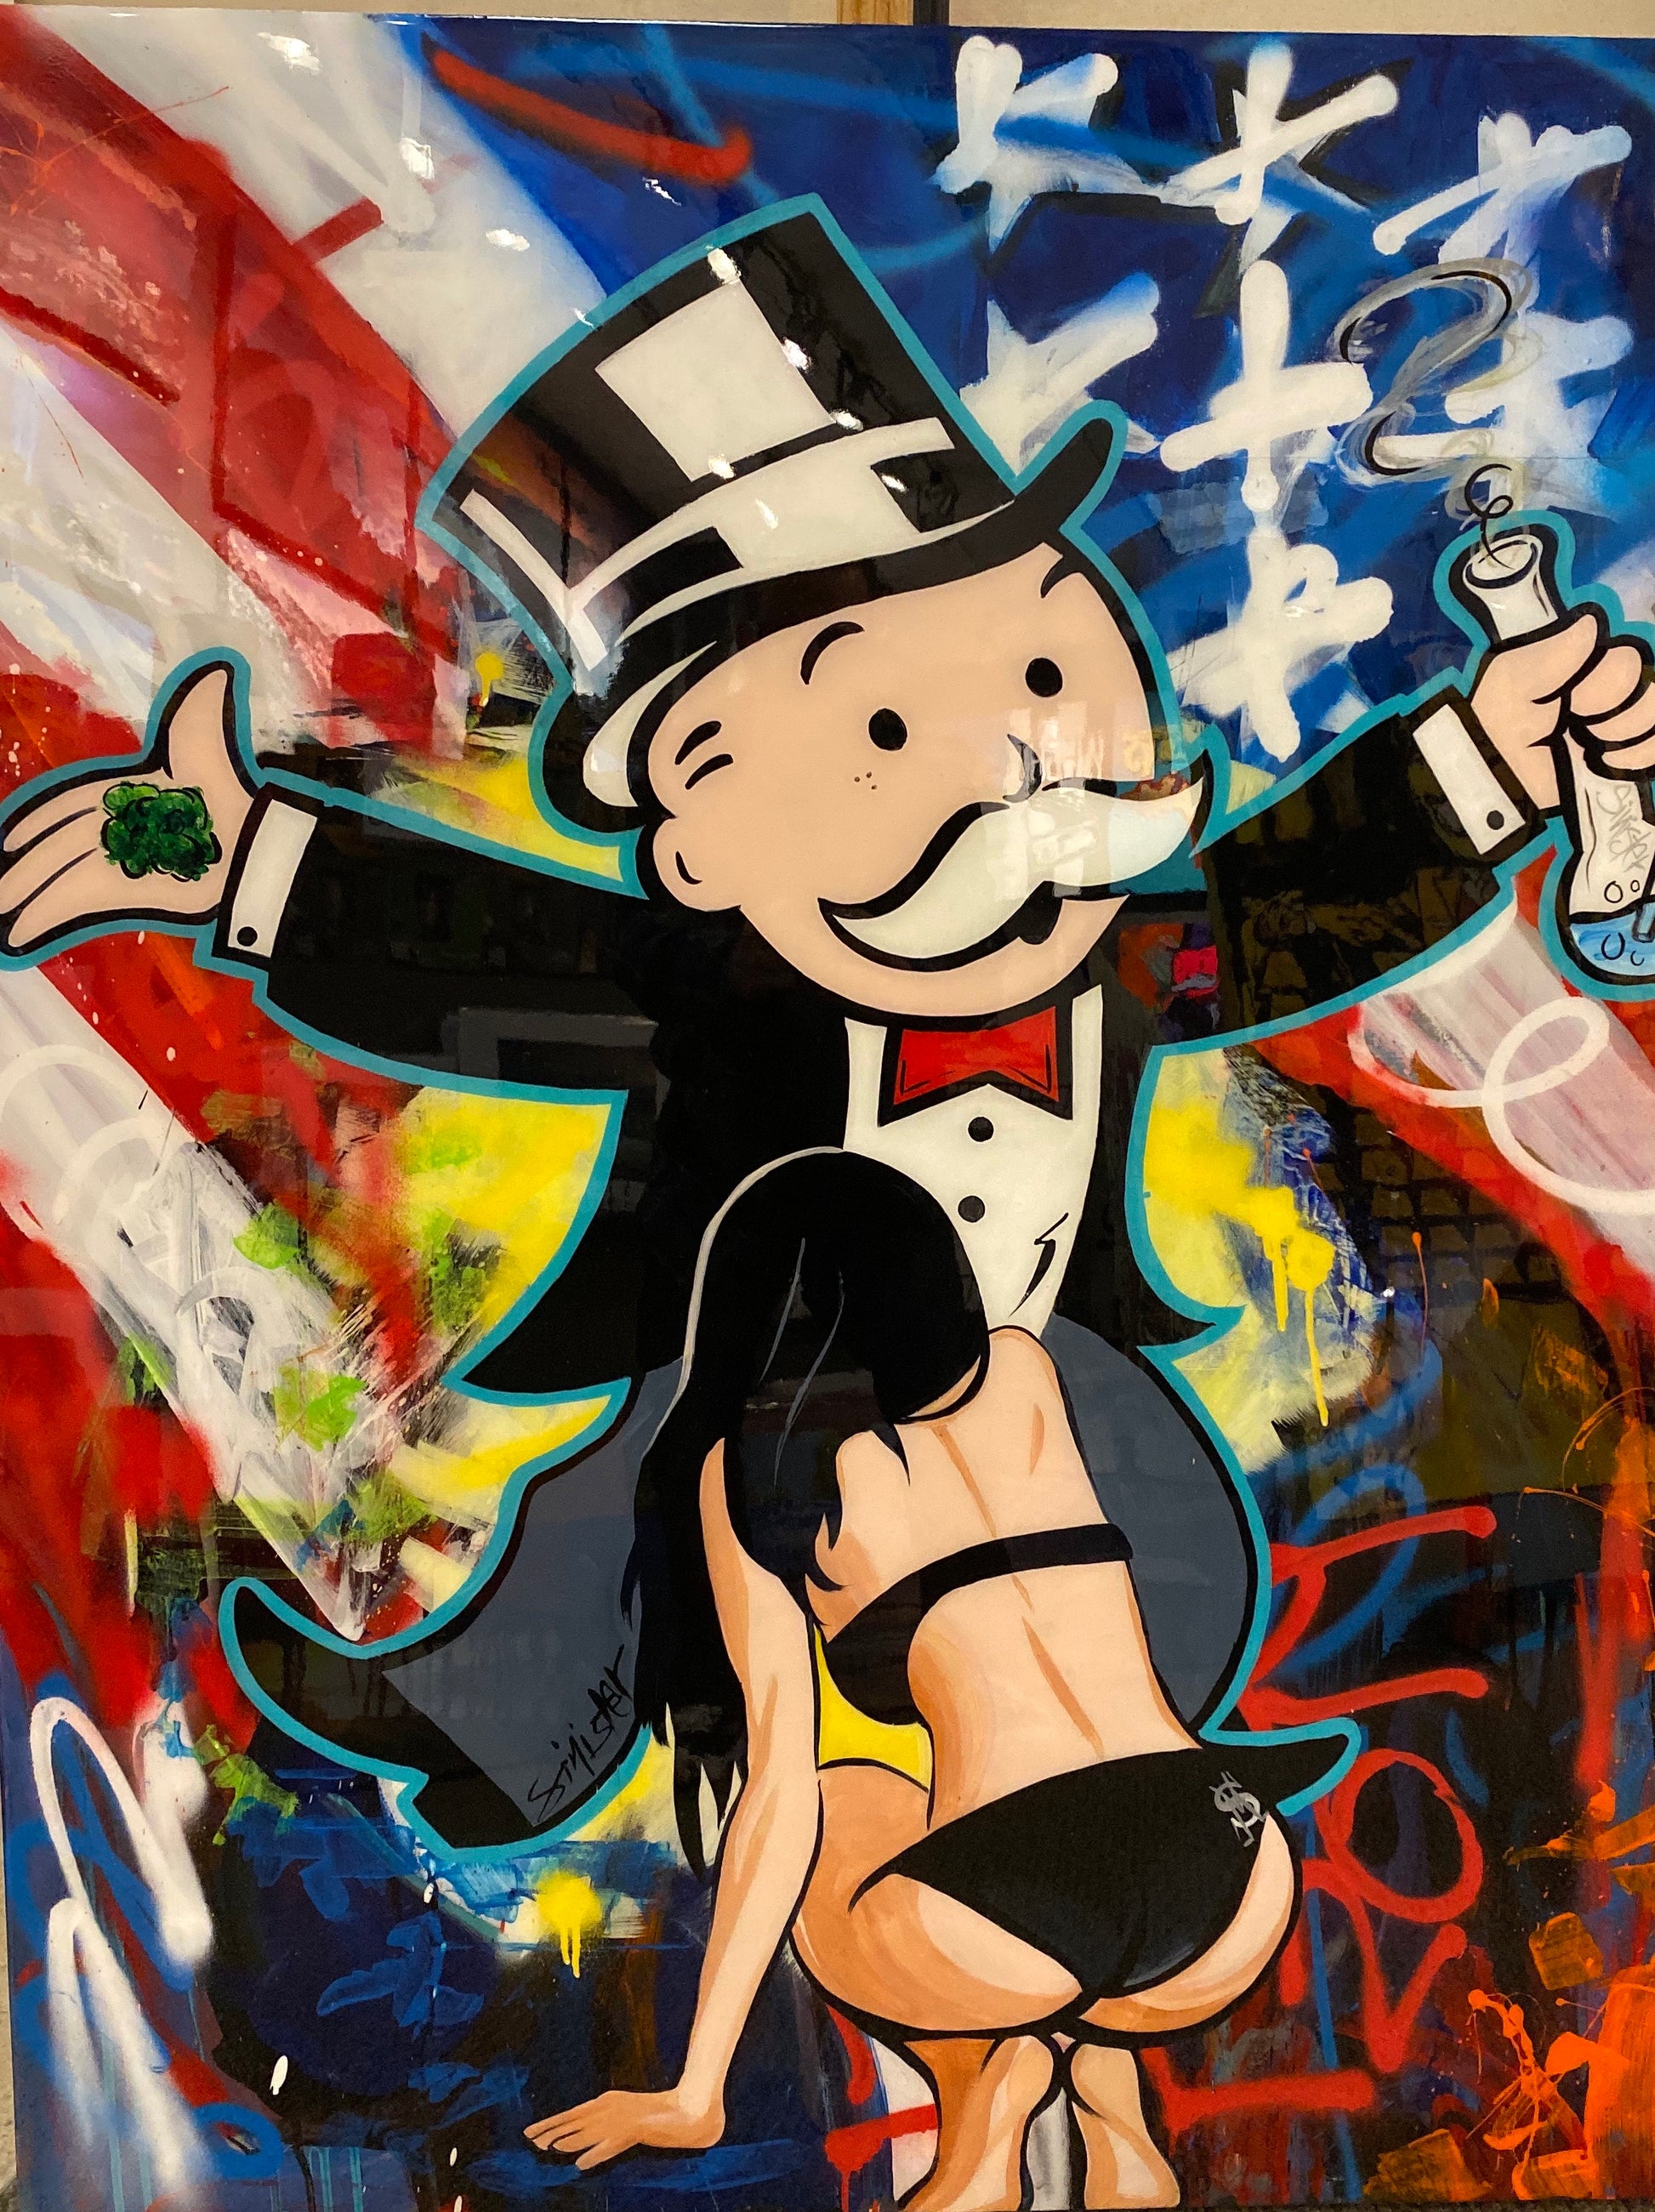 Sinister Monopoly “The American Dream” Original on Wood